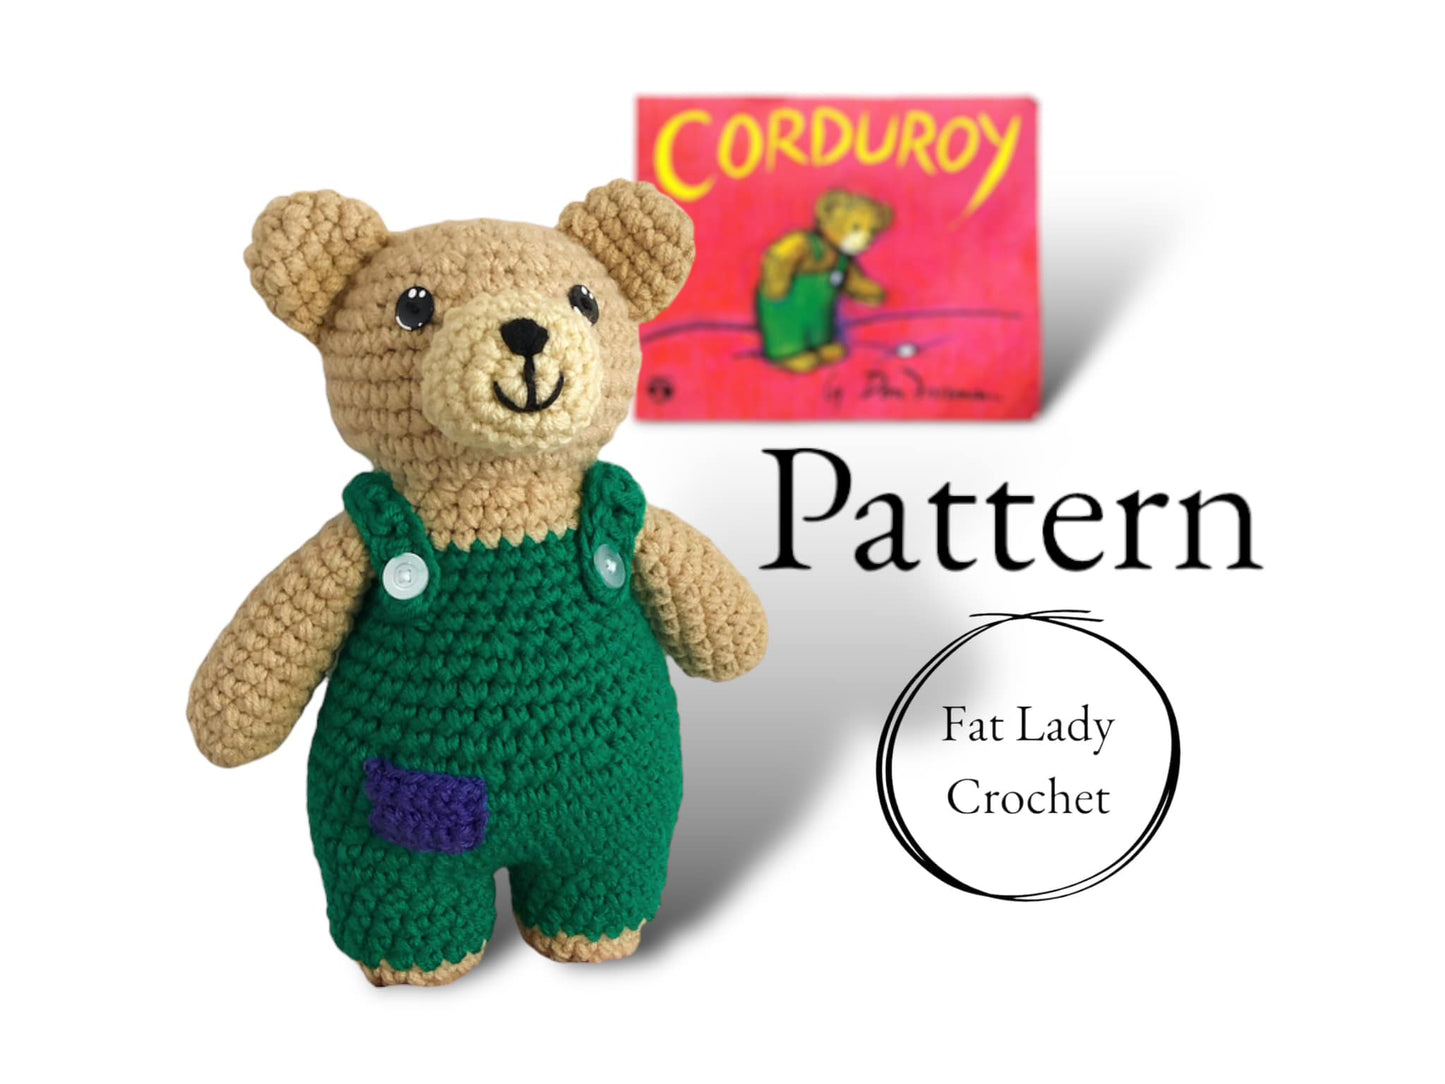 PATTERN Pack: Crochet Children's Books Classics, Harold and the Purple Crayon, Madeline, Corduroy, The Snowy Day, Curious George PDF